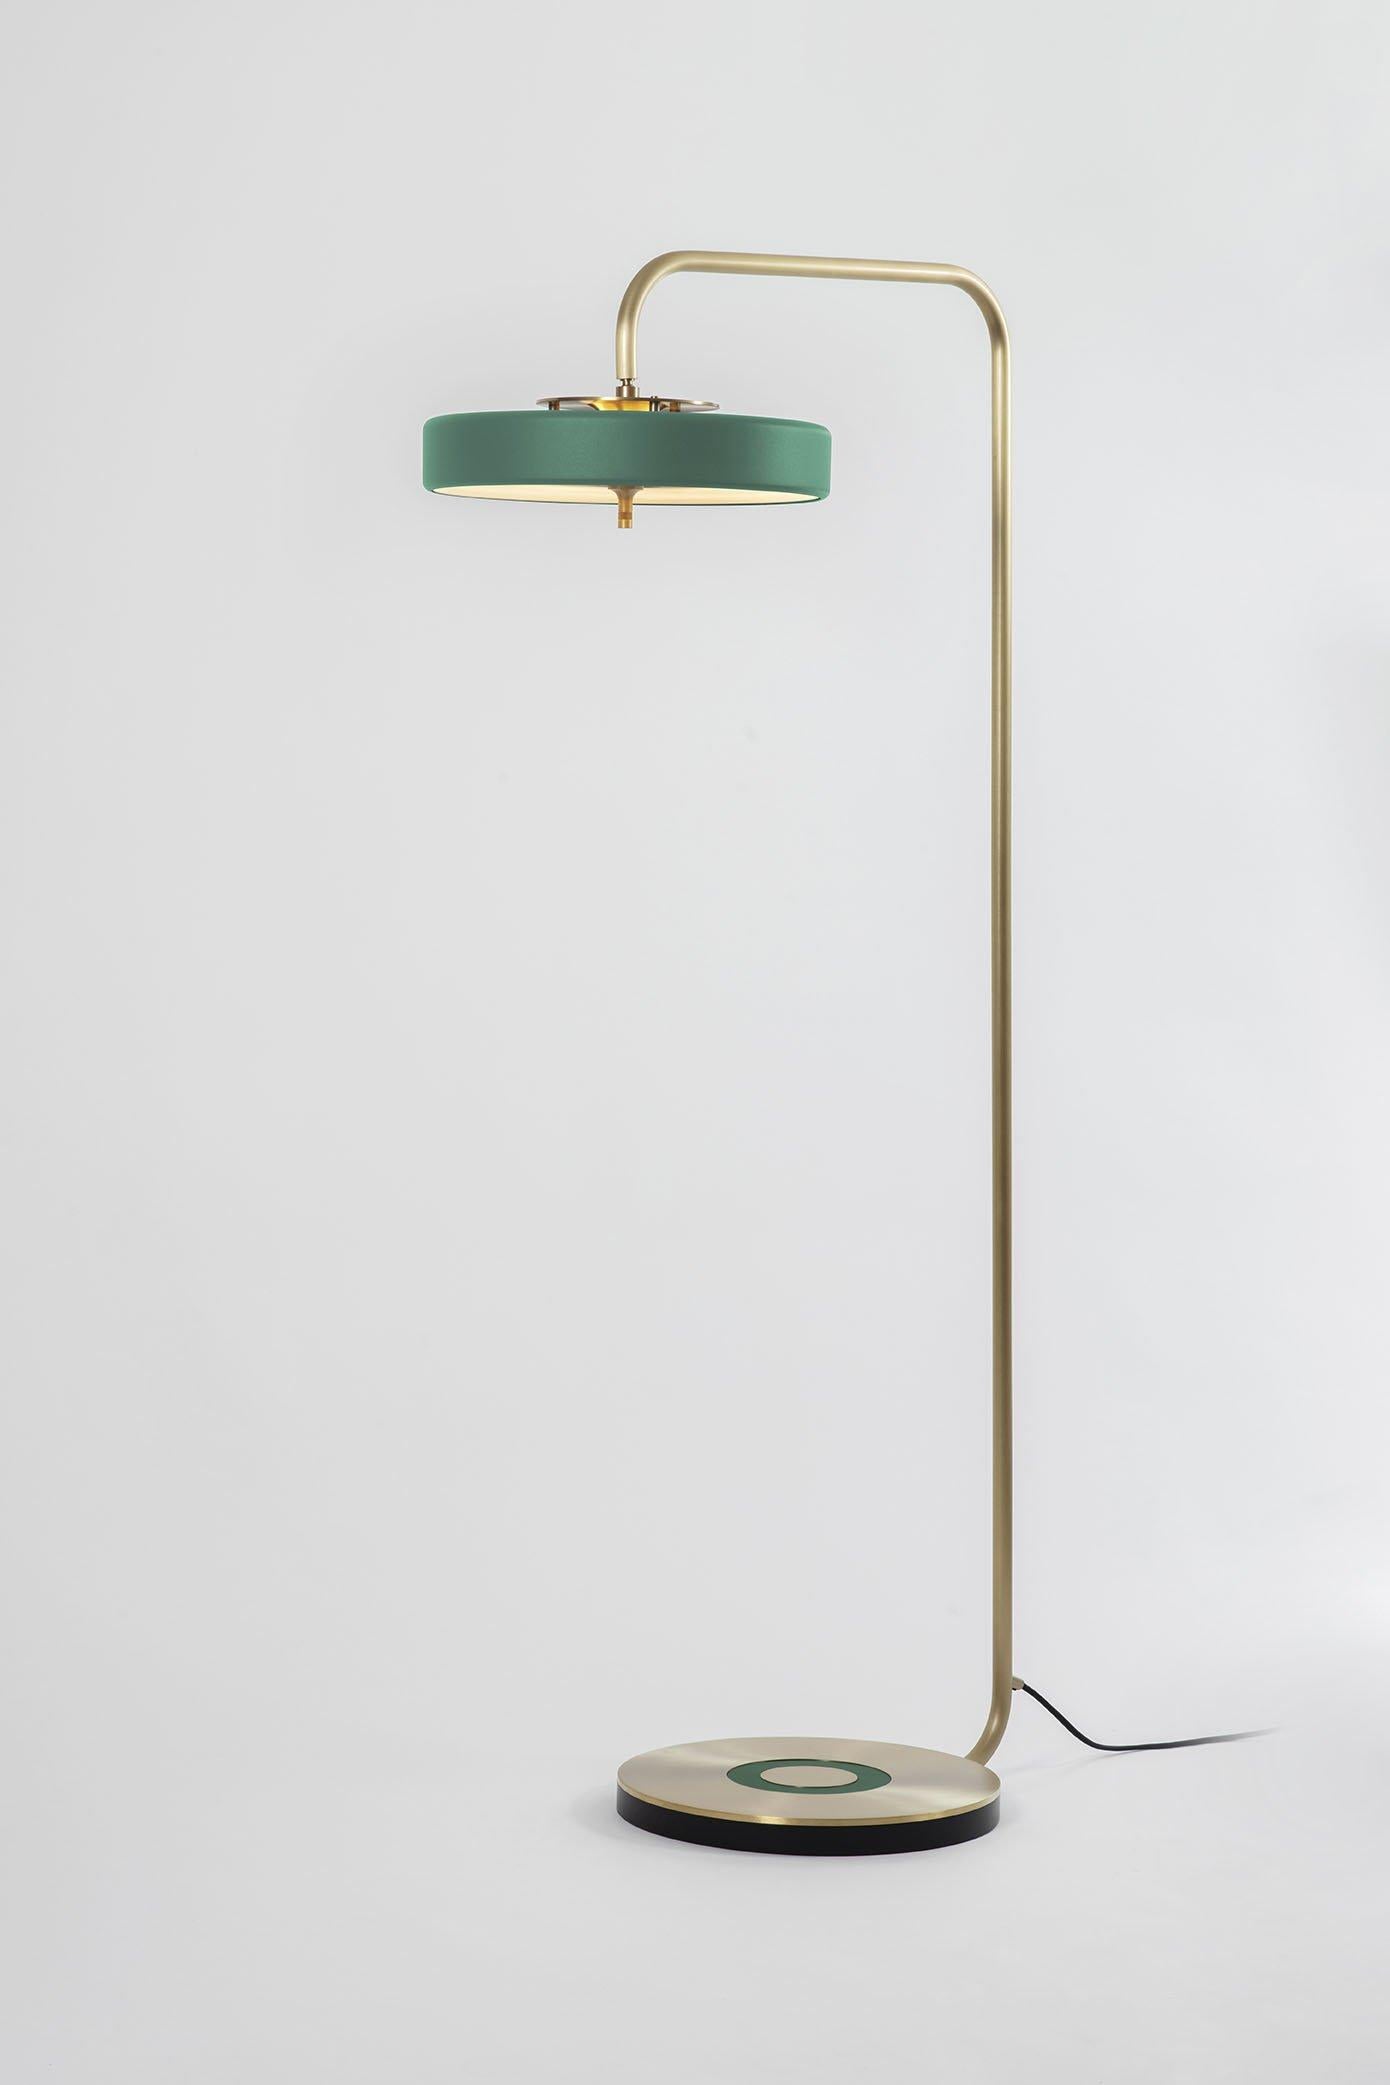 Revolve Floor Lamp, Polished Brass, Green by Bert Frank In New Condition For Sale In Geneve, CH